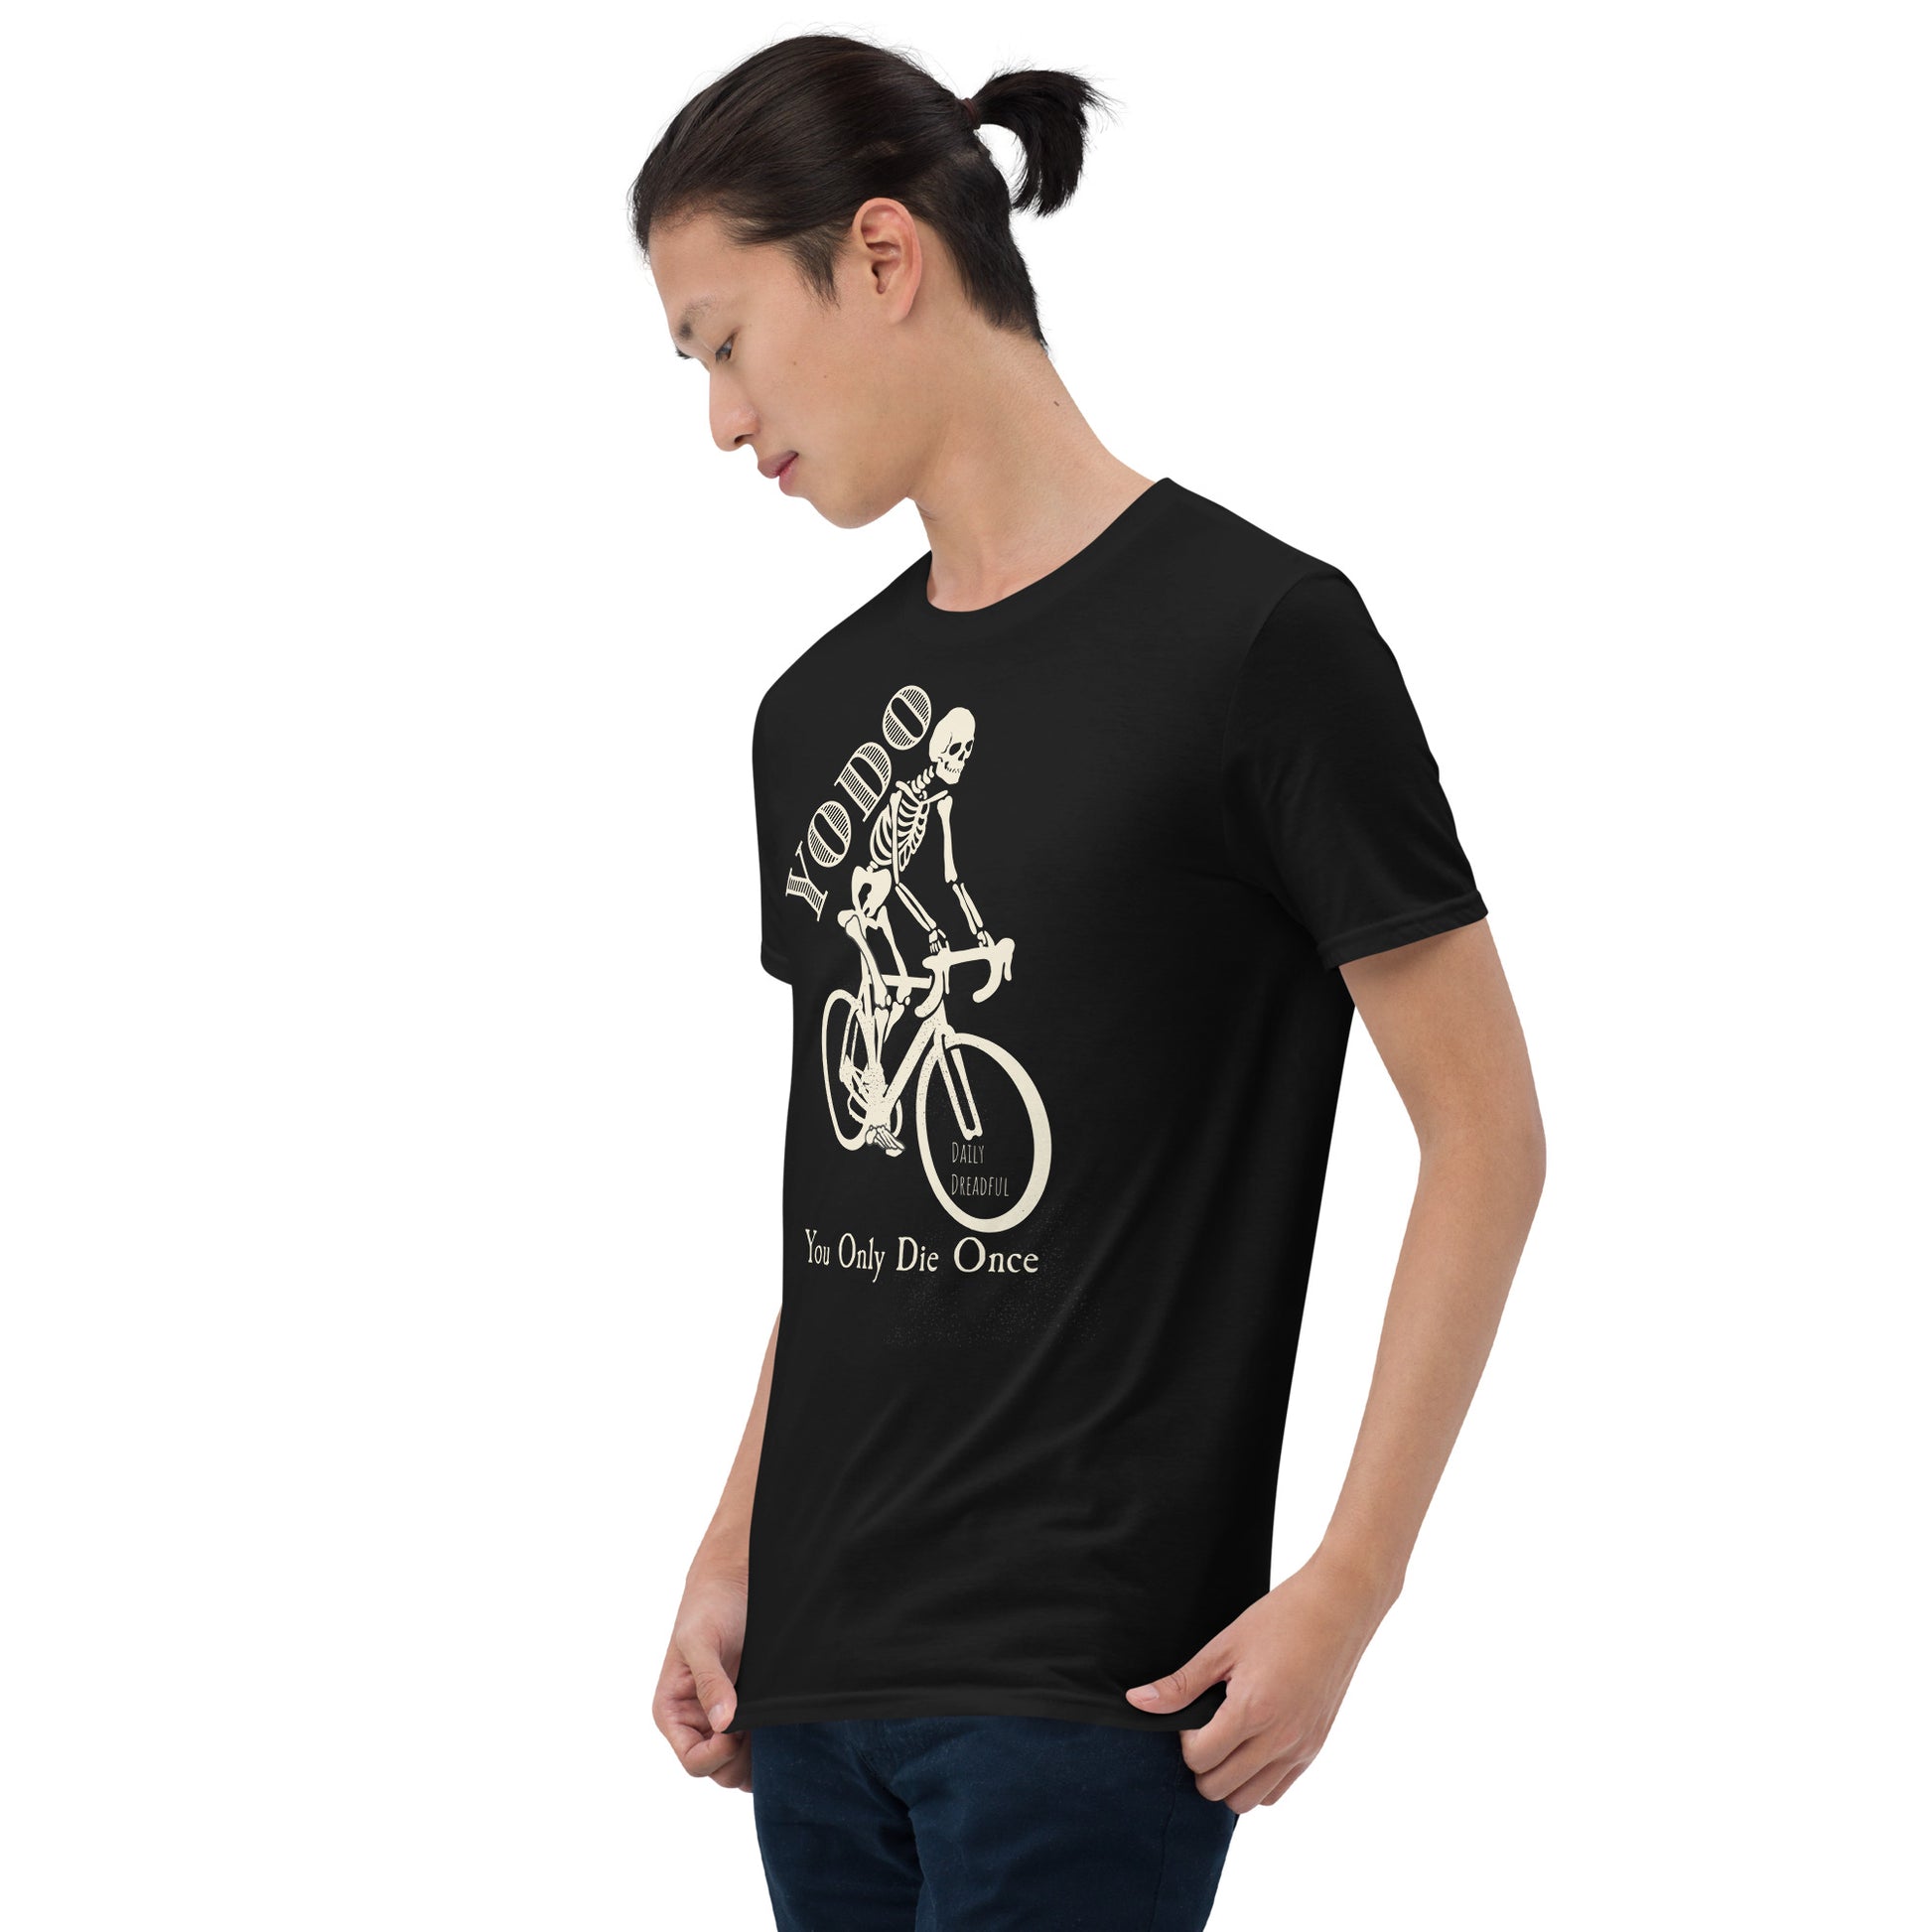 black "YODO" You Only Die Once Short-Sleeve Men's T-shirt from Daily Dreadful